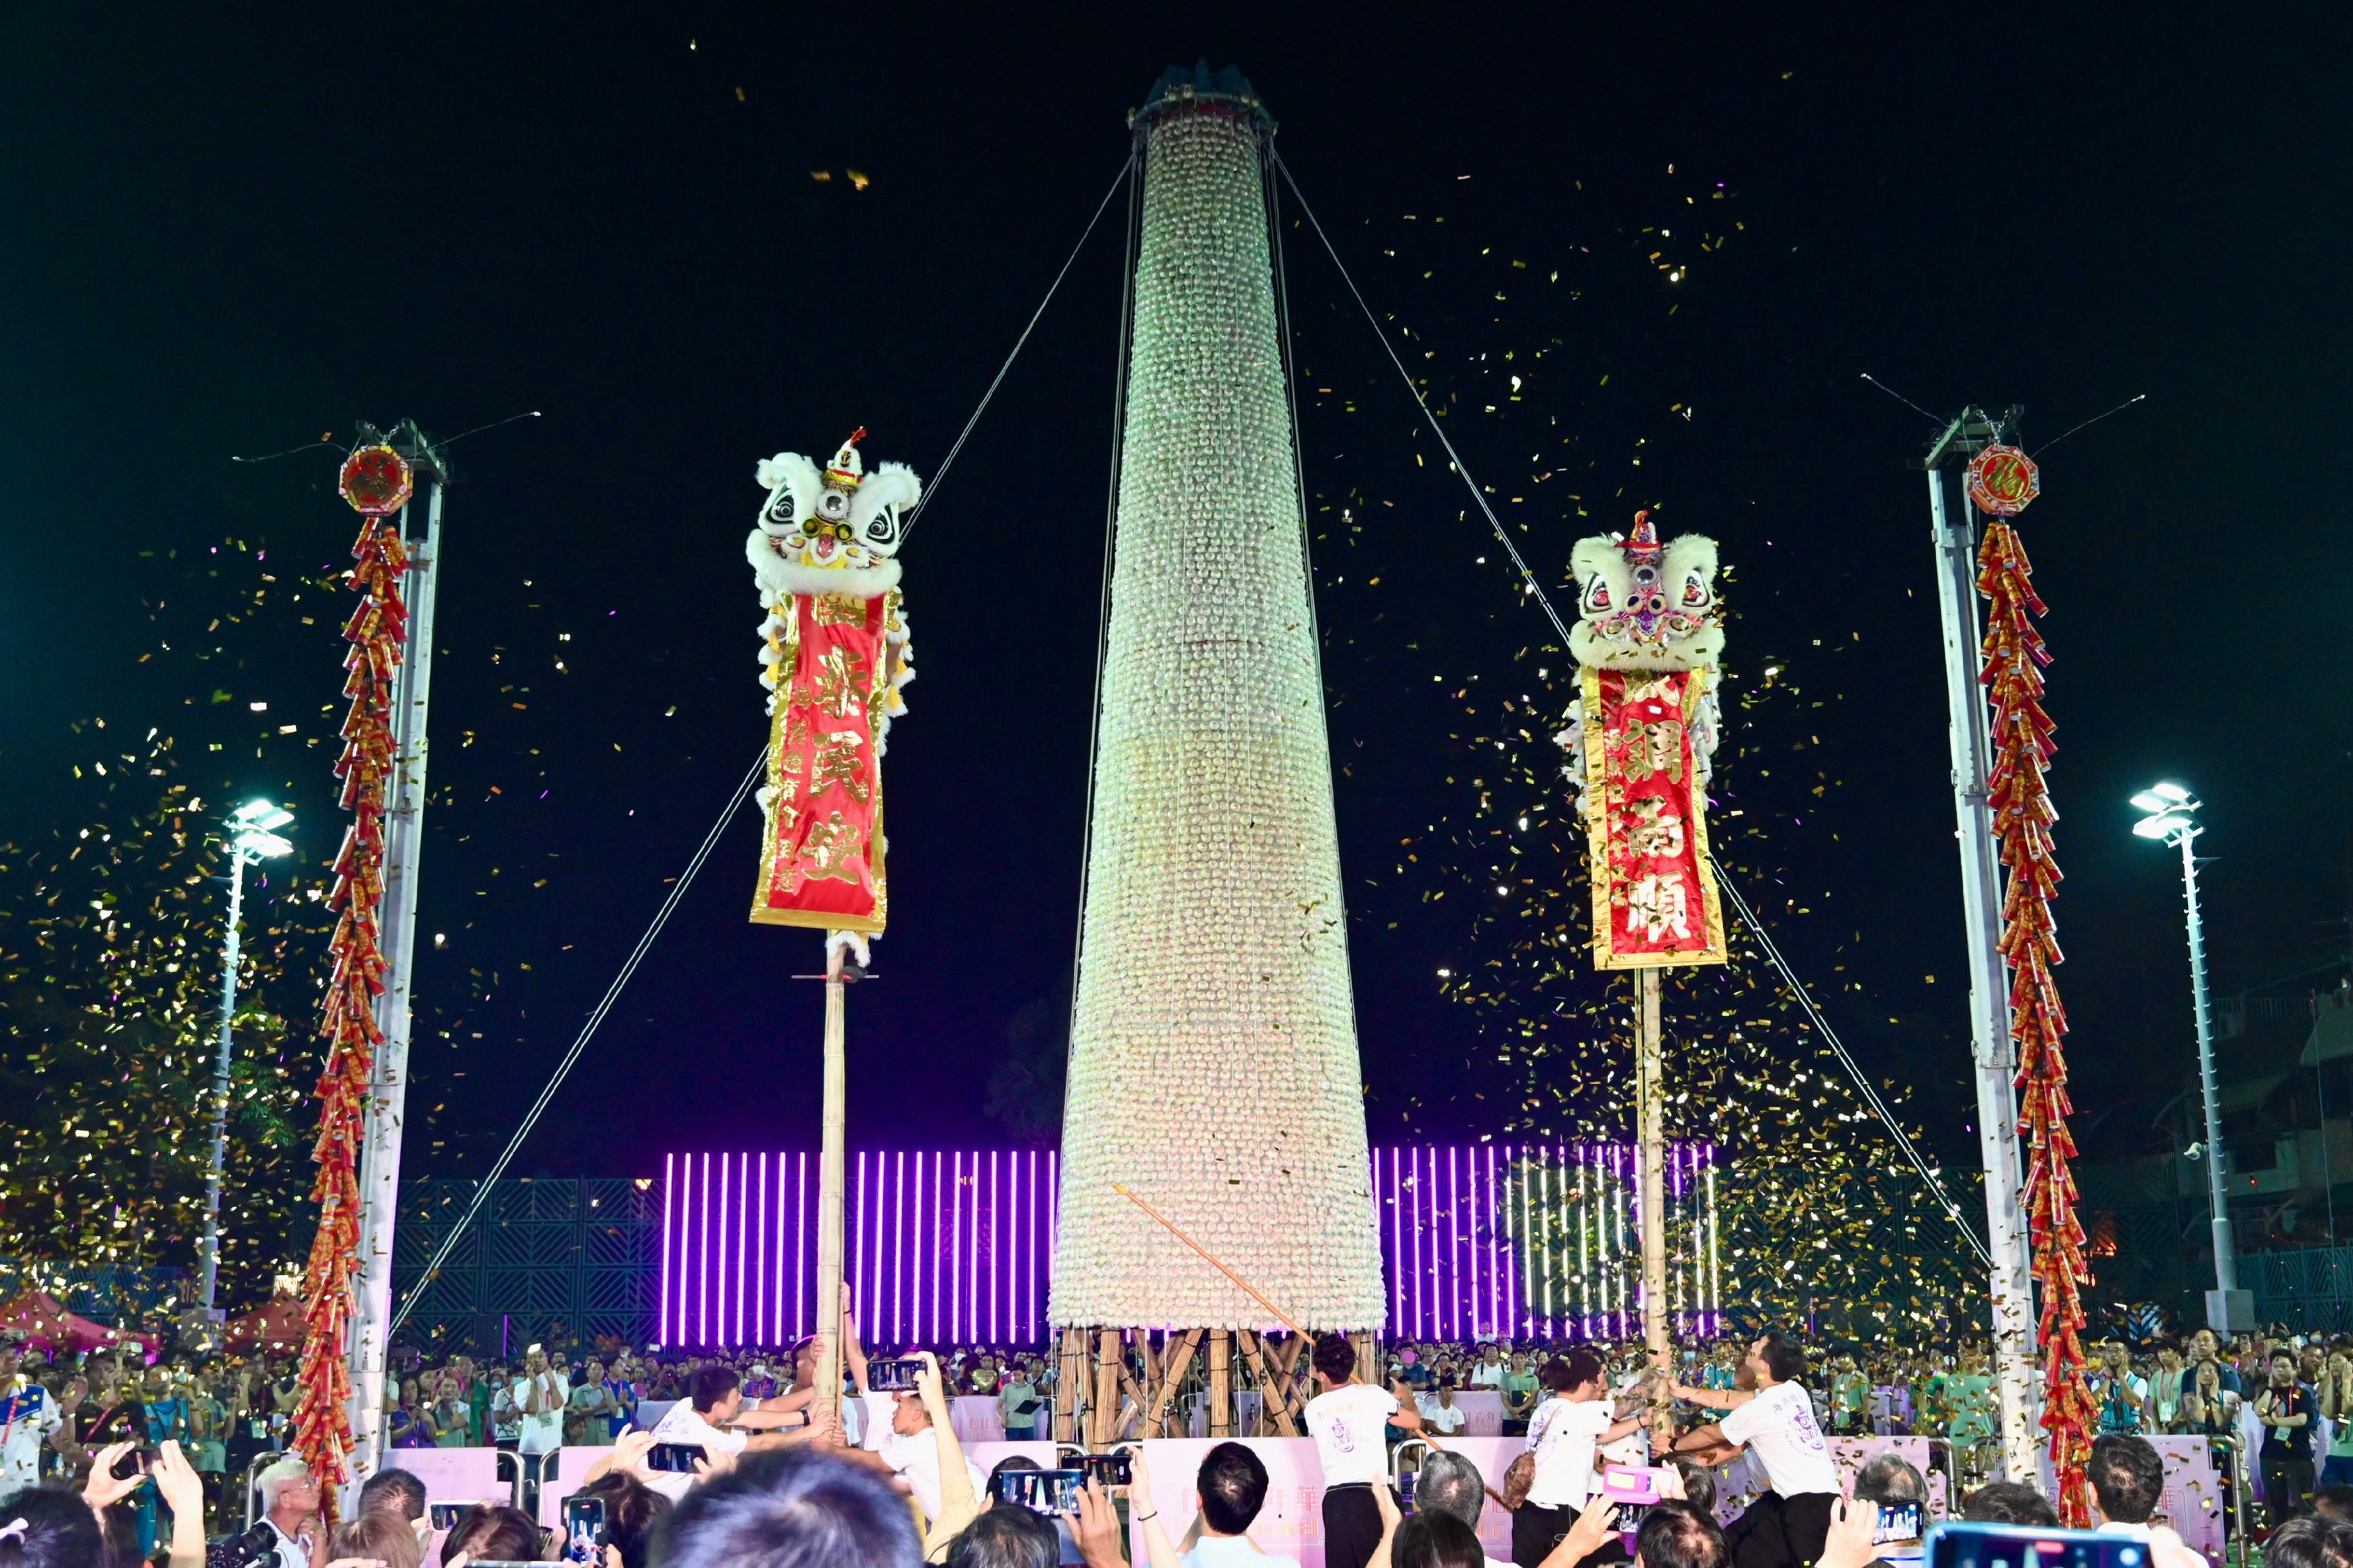 The Bun Scrambling Competition on Cheung Chau concluded early this morning (May 27). Picture shows the lion dance performance held before the final.